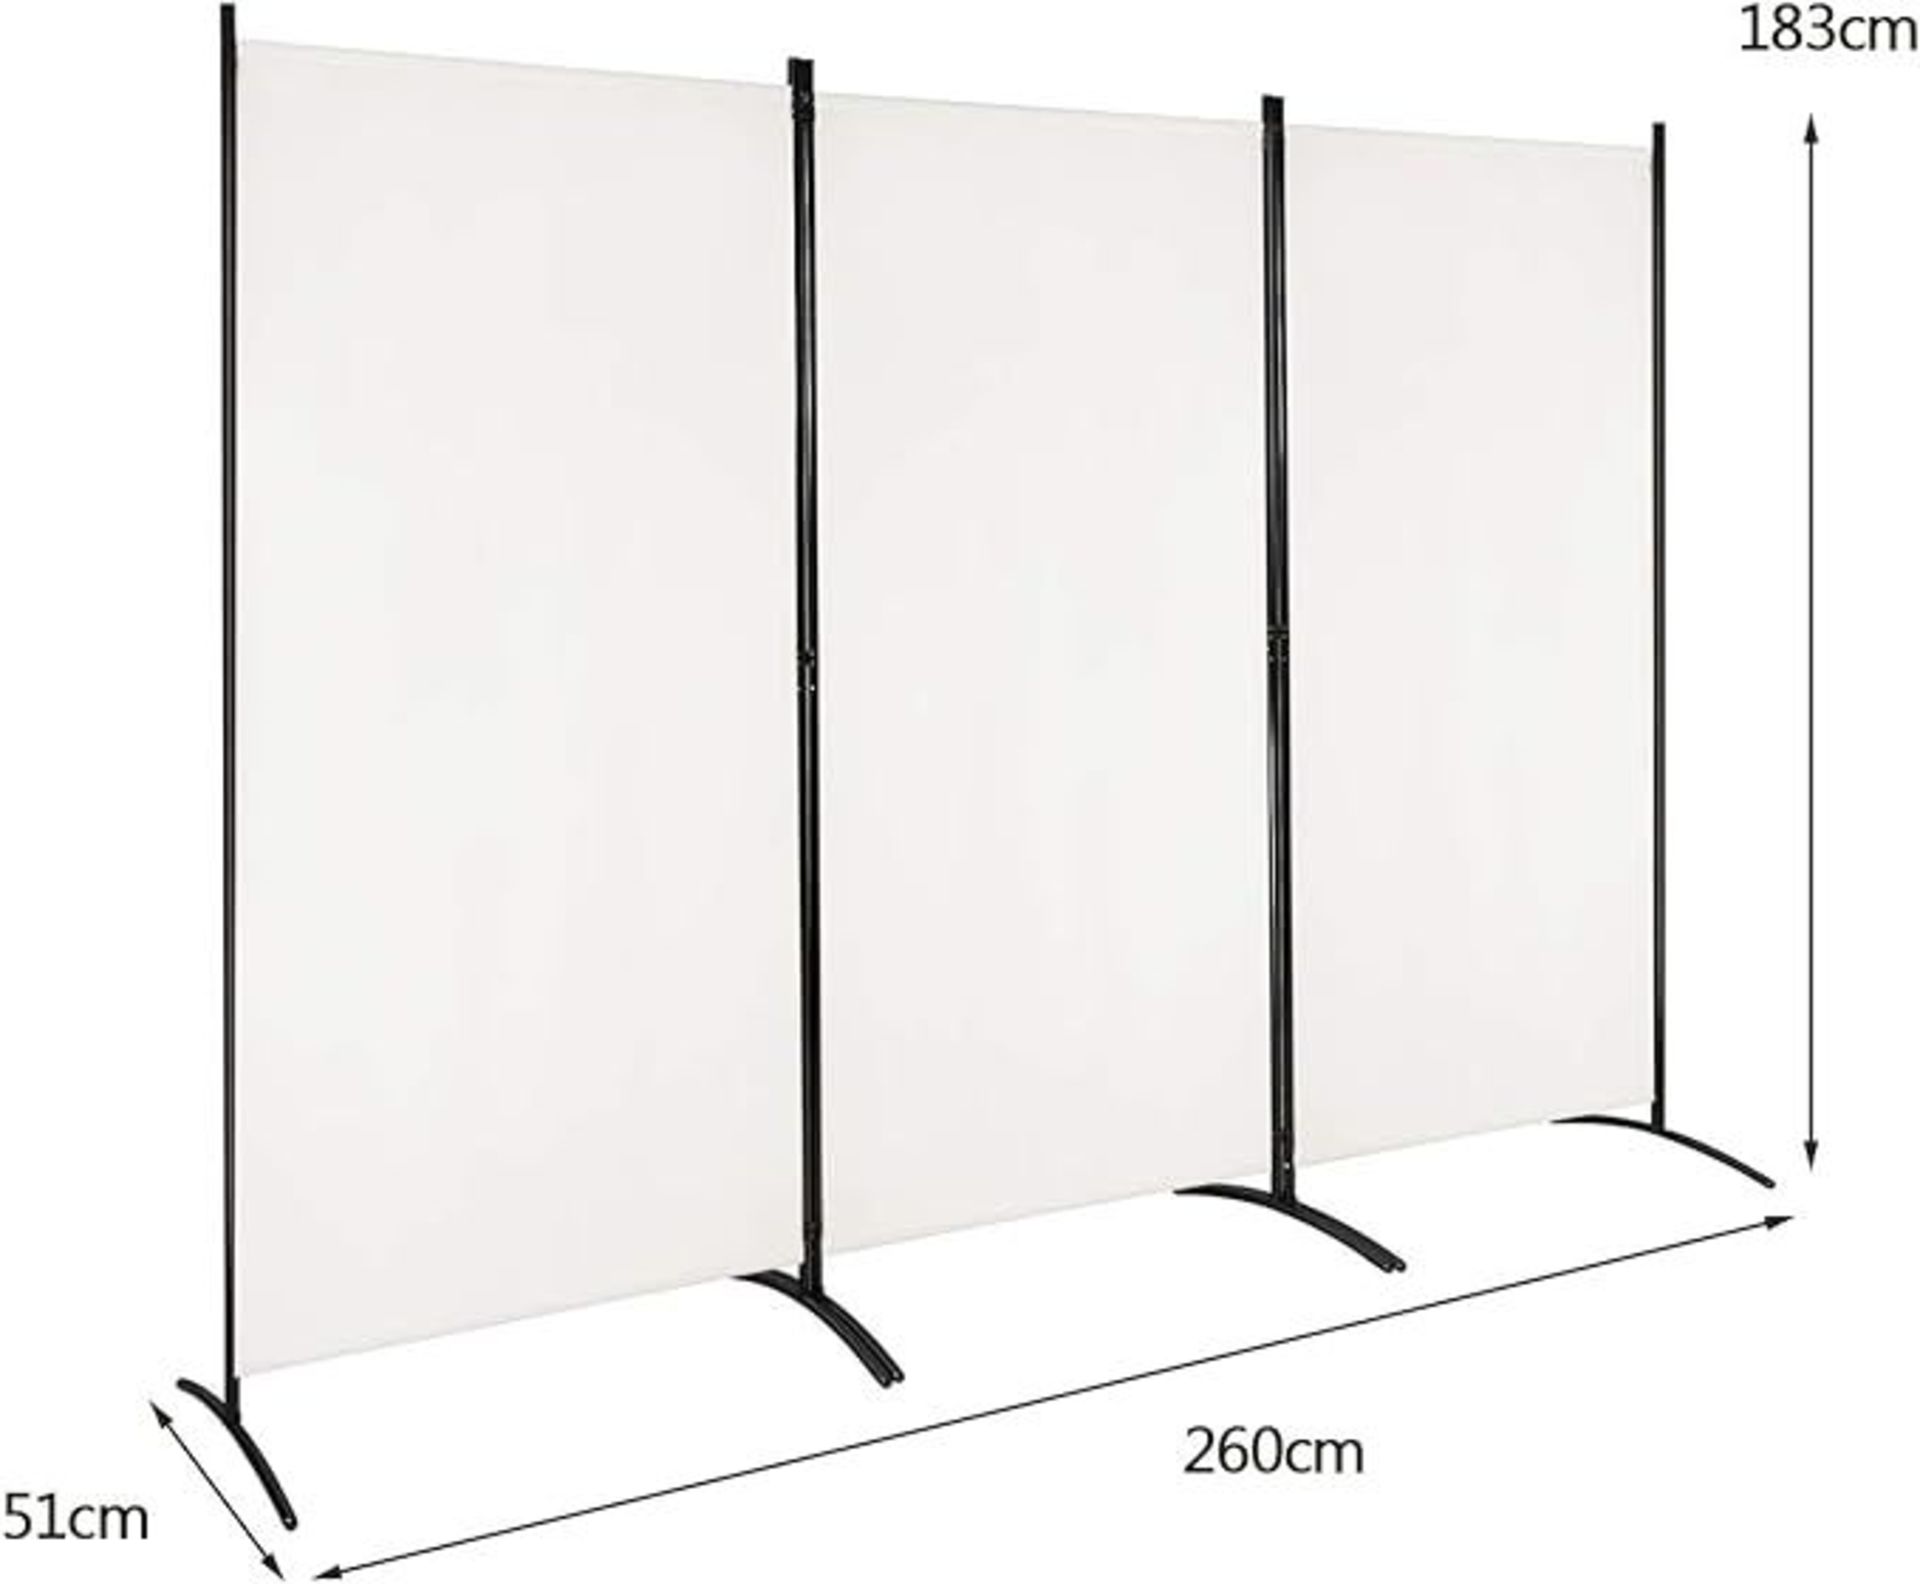 Luxury Folding Room Divider, 3 Panels Wall Privacy Screen Protector, Living Room Bedroom Bathroom